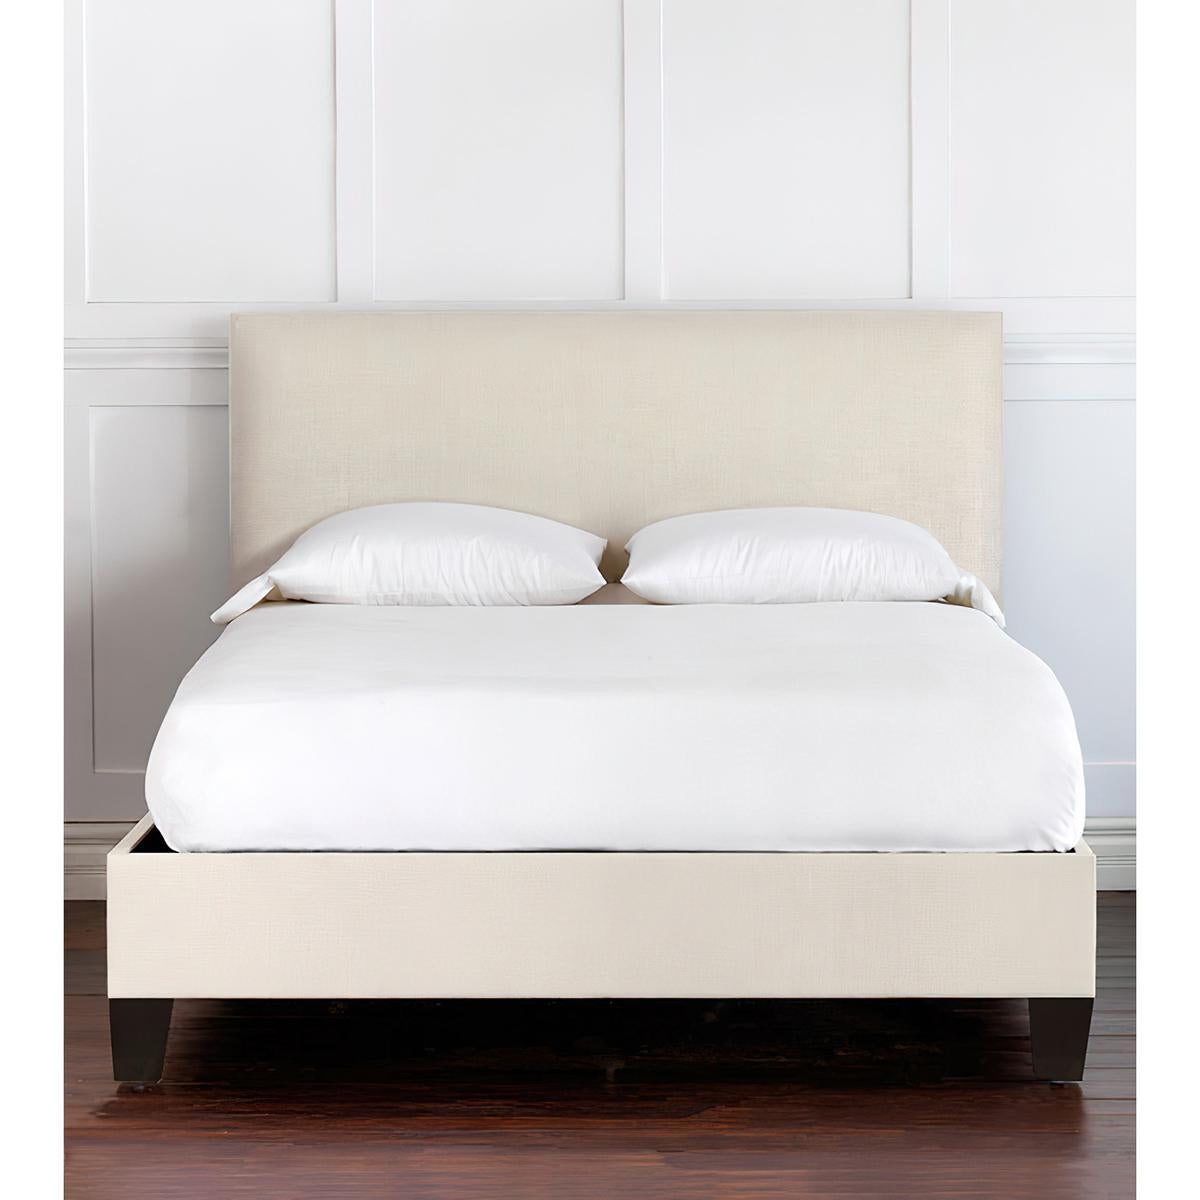 Upholstered Bed Frame, as part of our Made in America quick ship program, these beds are ready within a week to ship. 

With its streamlined low-profile design, simply sophisticated with full upholstery to the thickly padded upholstered headboard,